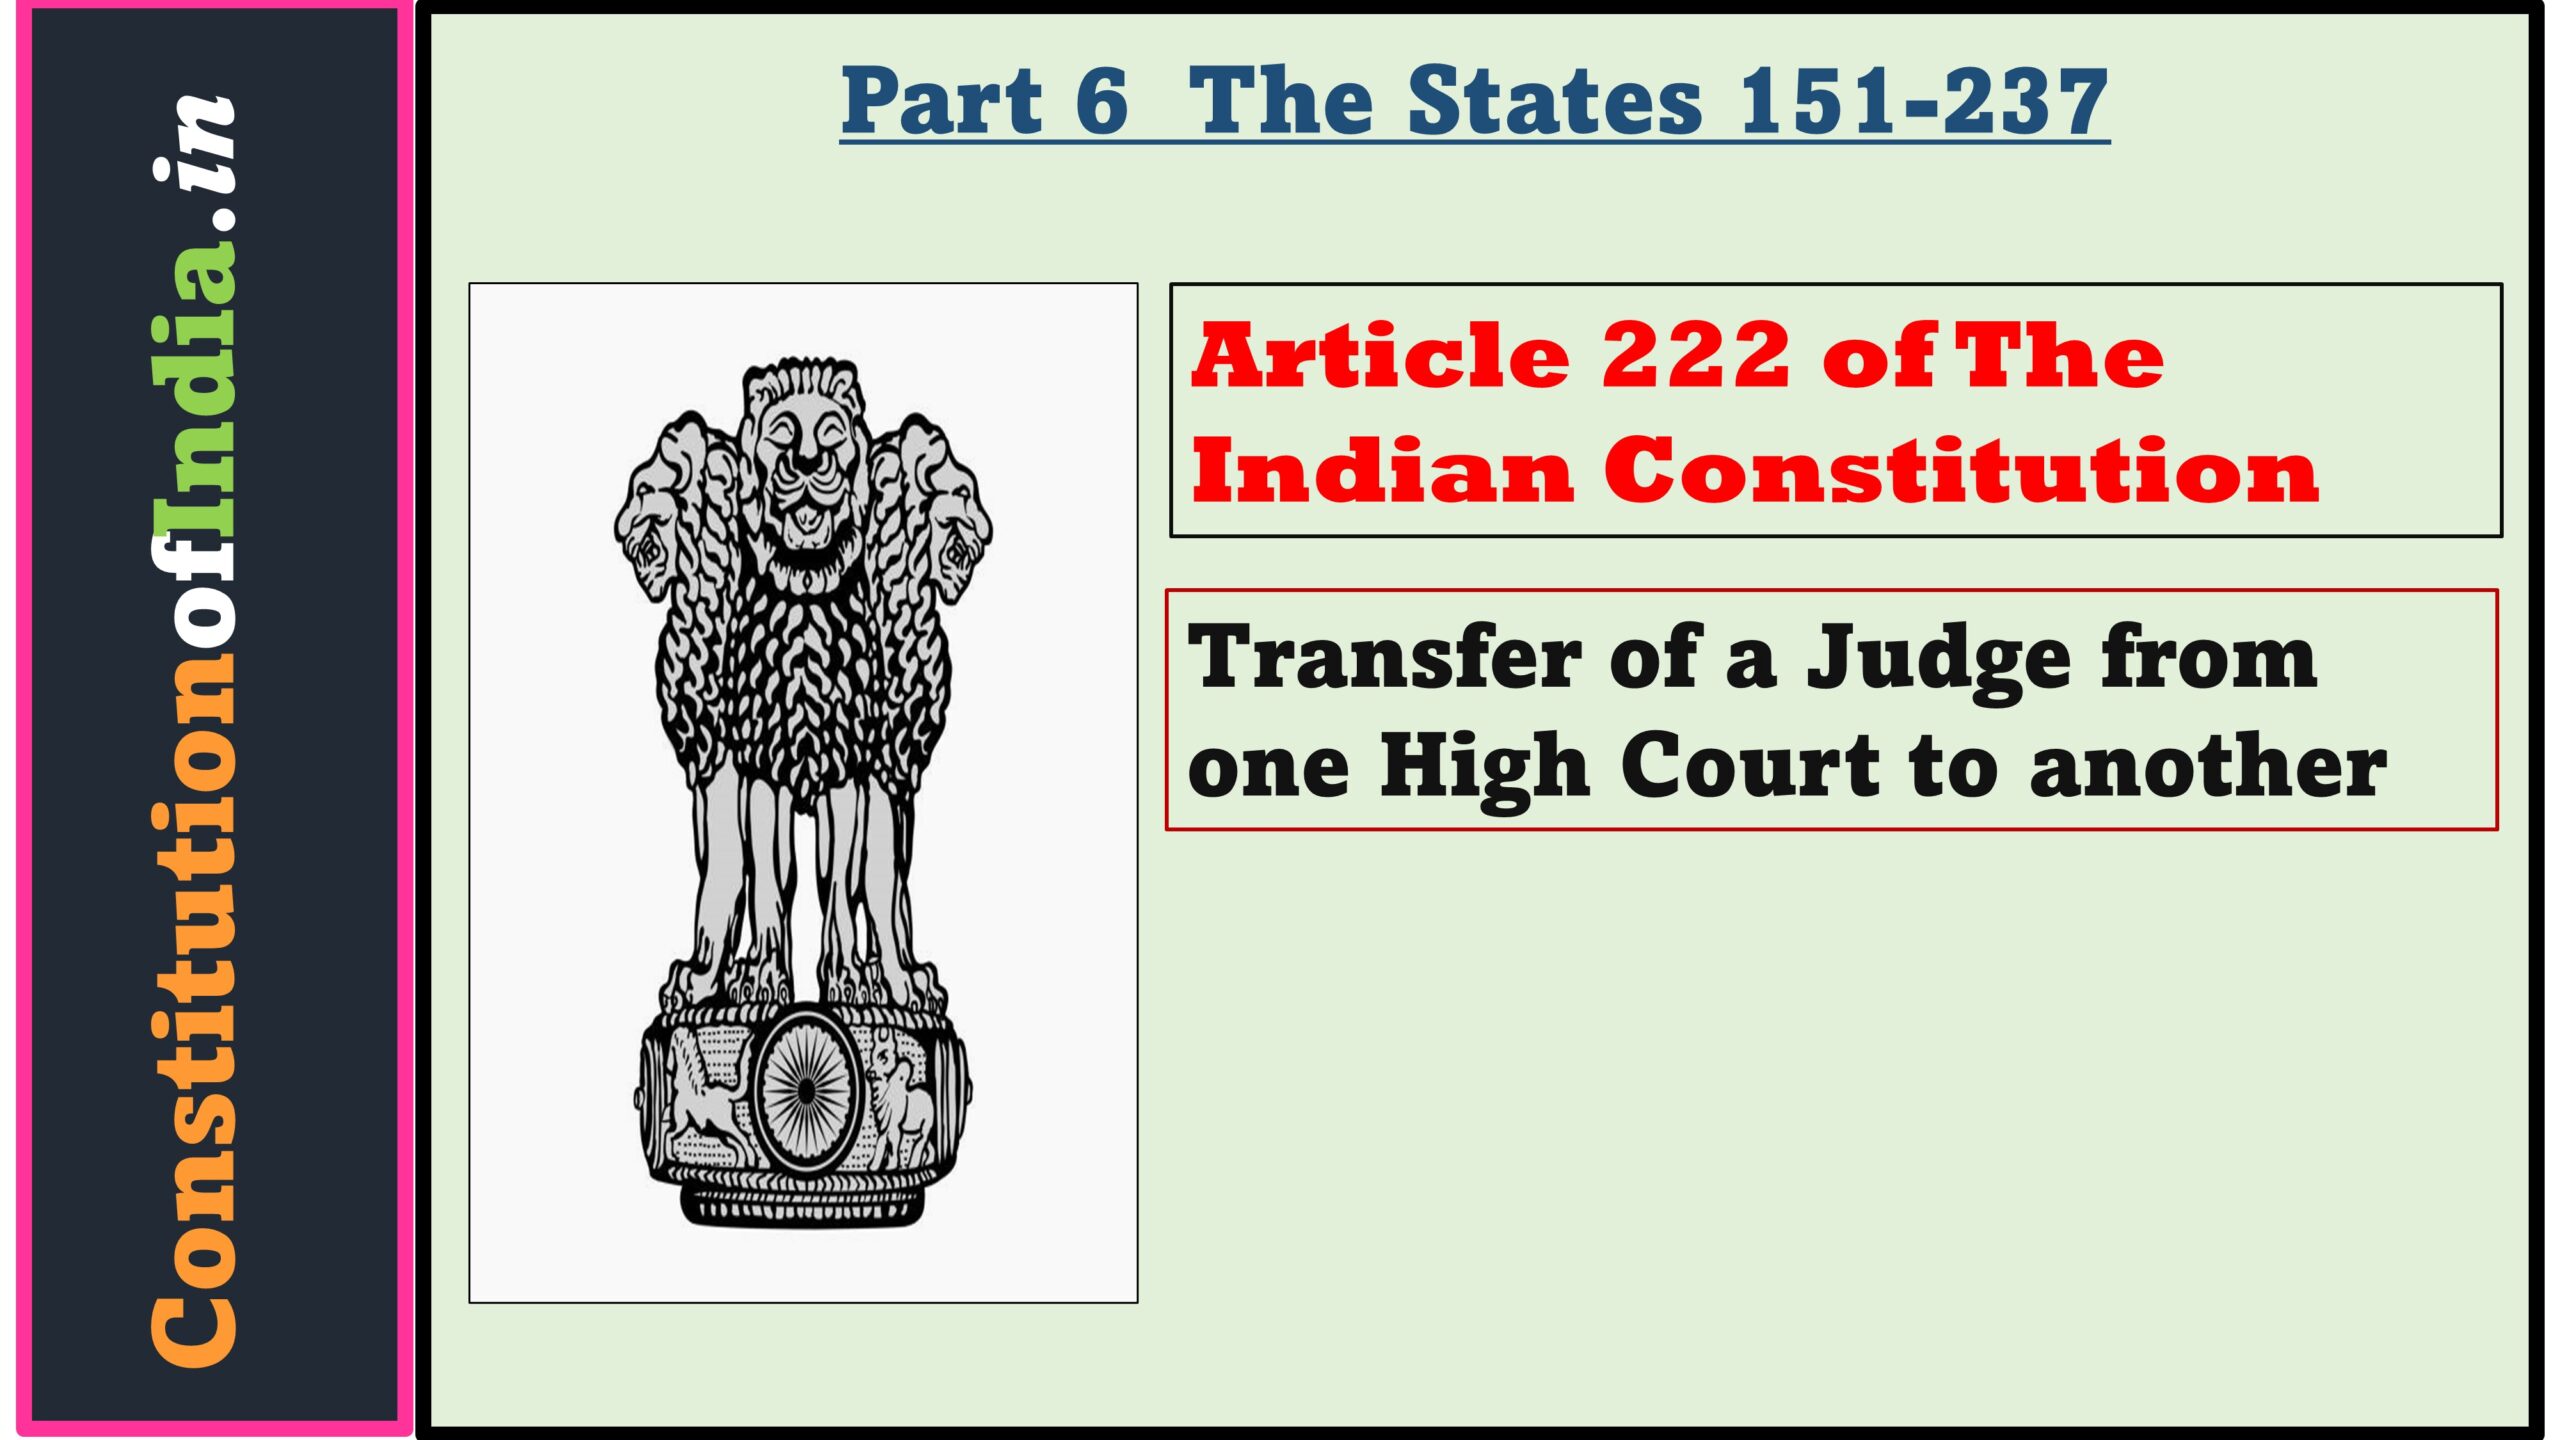 Article 222 of The Indian Constitution